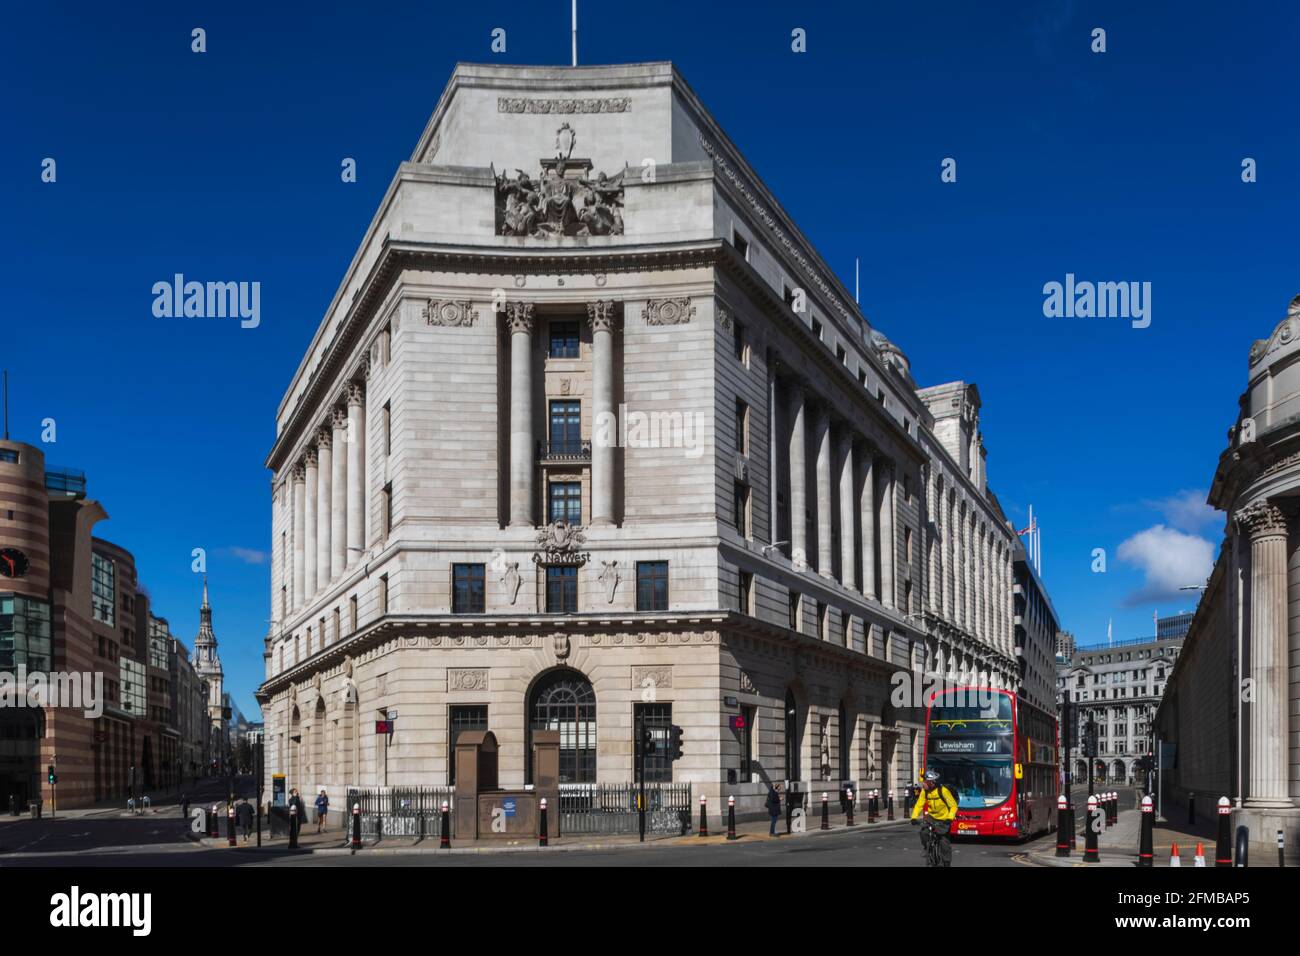 England, London, City of London, NatWest Bank Building on the Corner of Princes Street and Poultry Stock Photo